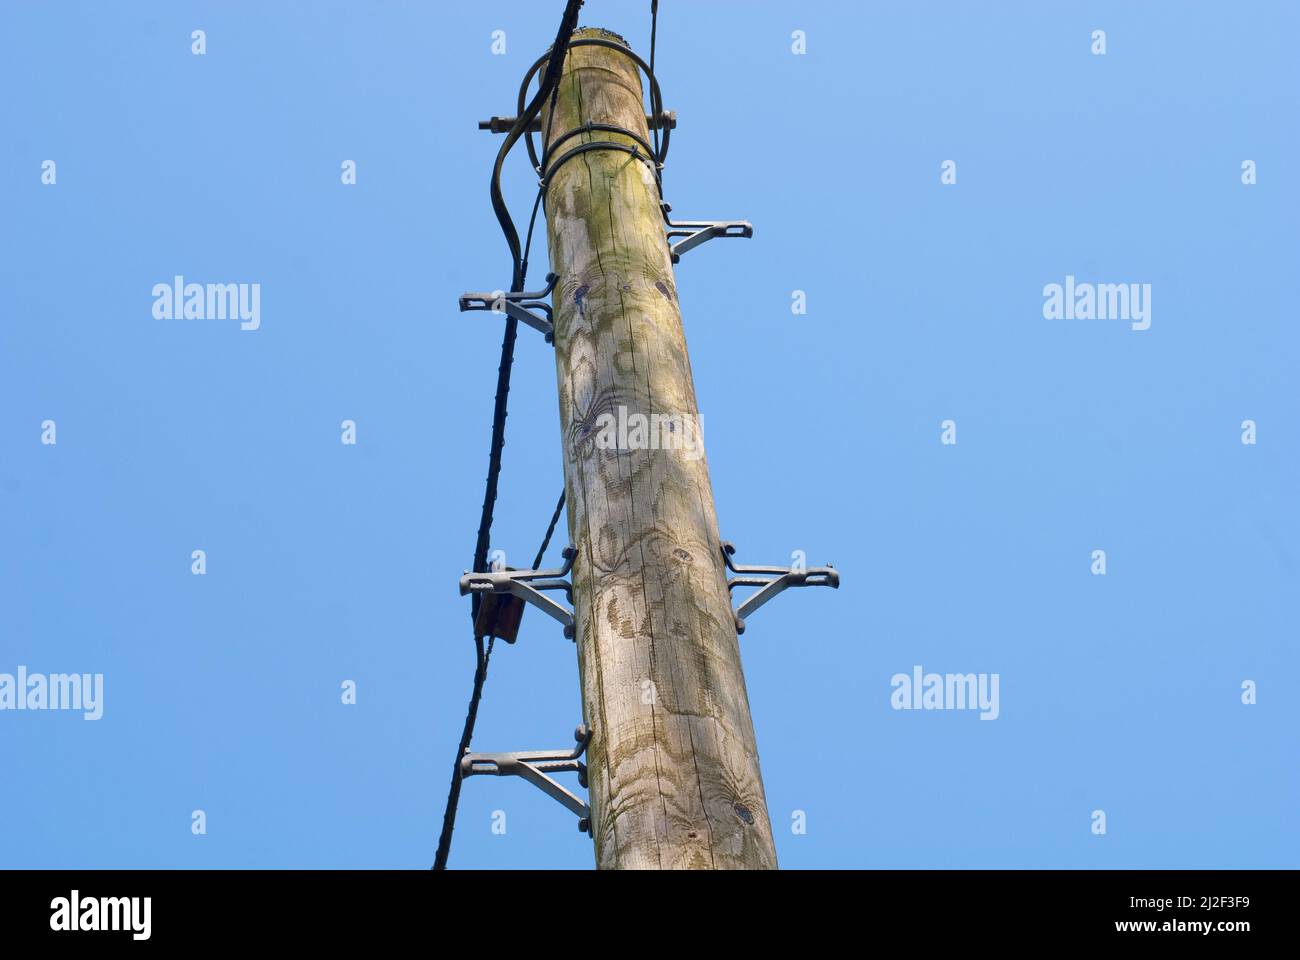 Telegraph Pole Steps And Copper Cable Infrastructure Stock Photo Alamy